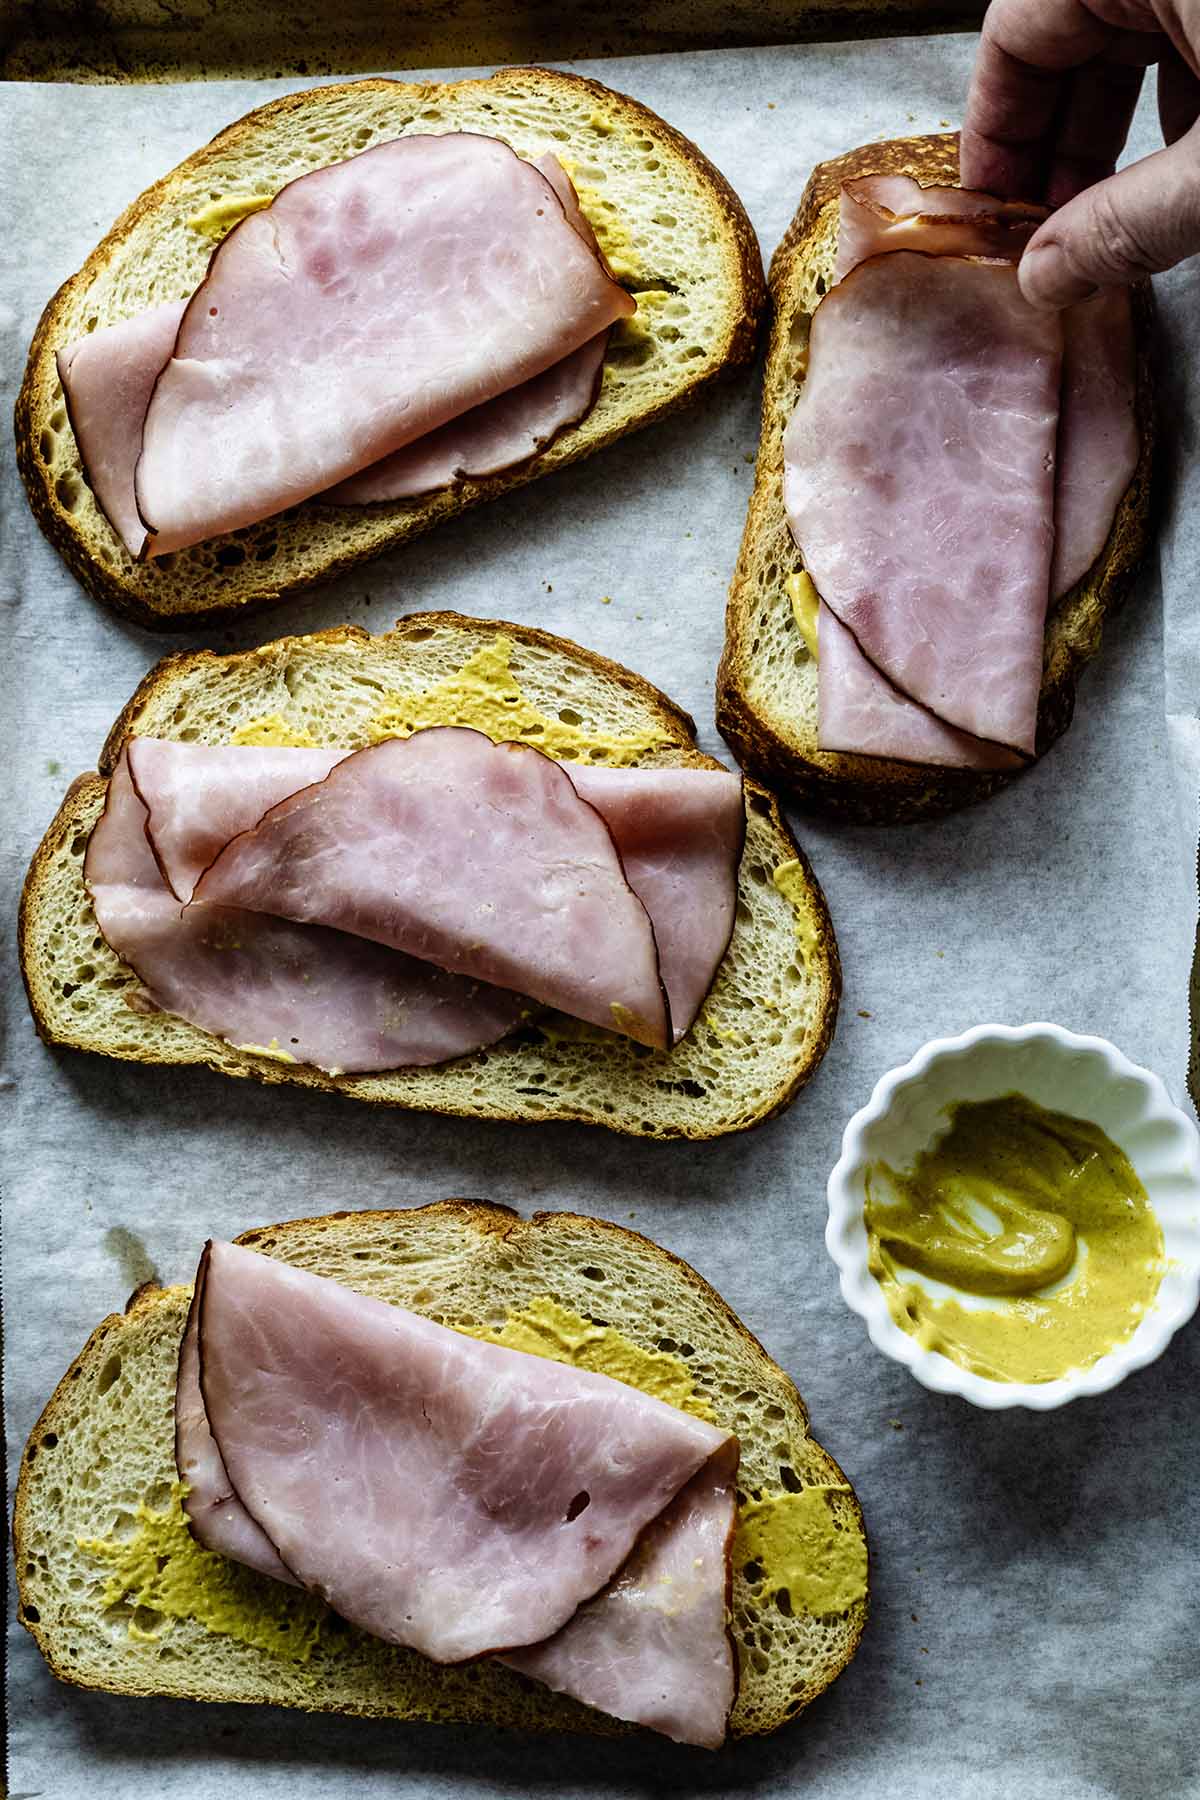 Placing ham slices on four sandwiches